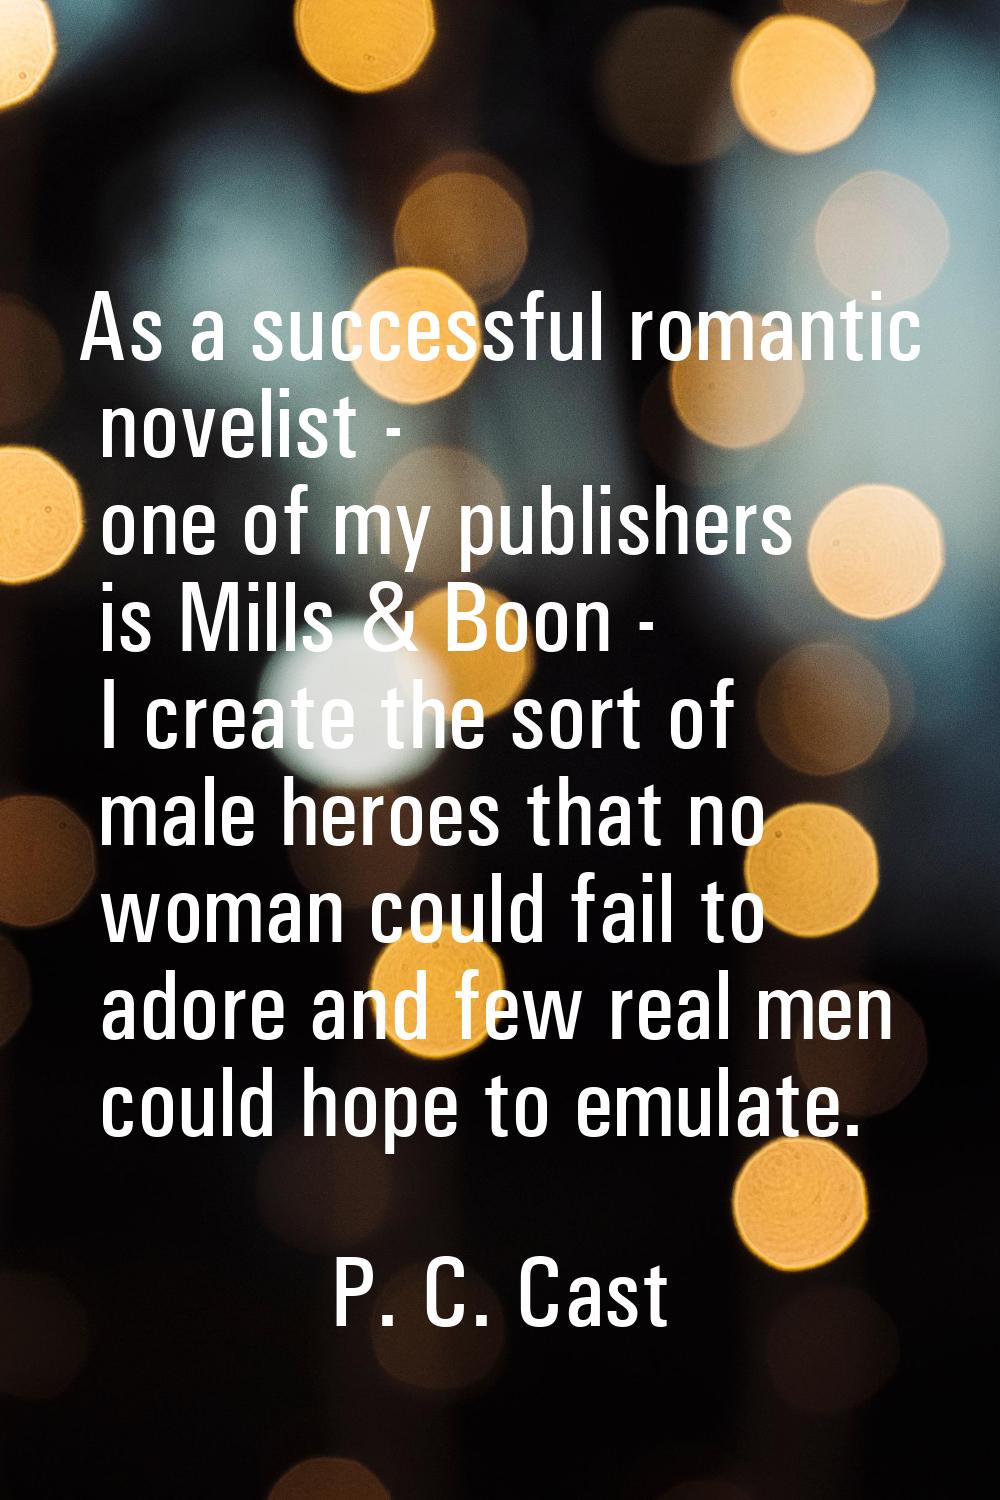 As a successful romantic novelist - one of my publishers is Mills & Boon - I create the sort of mal